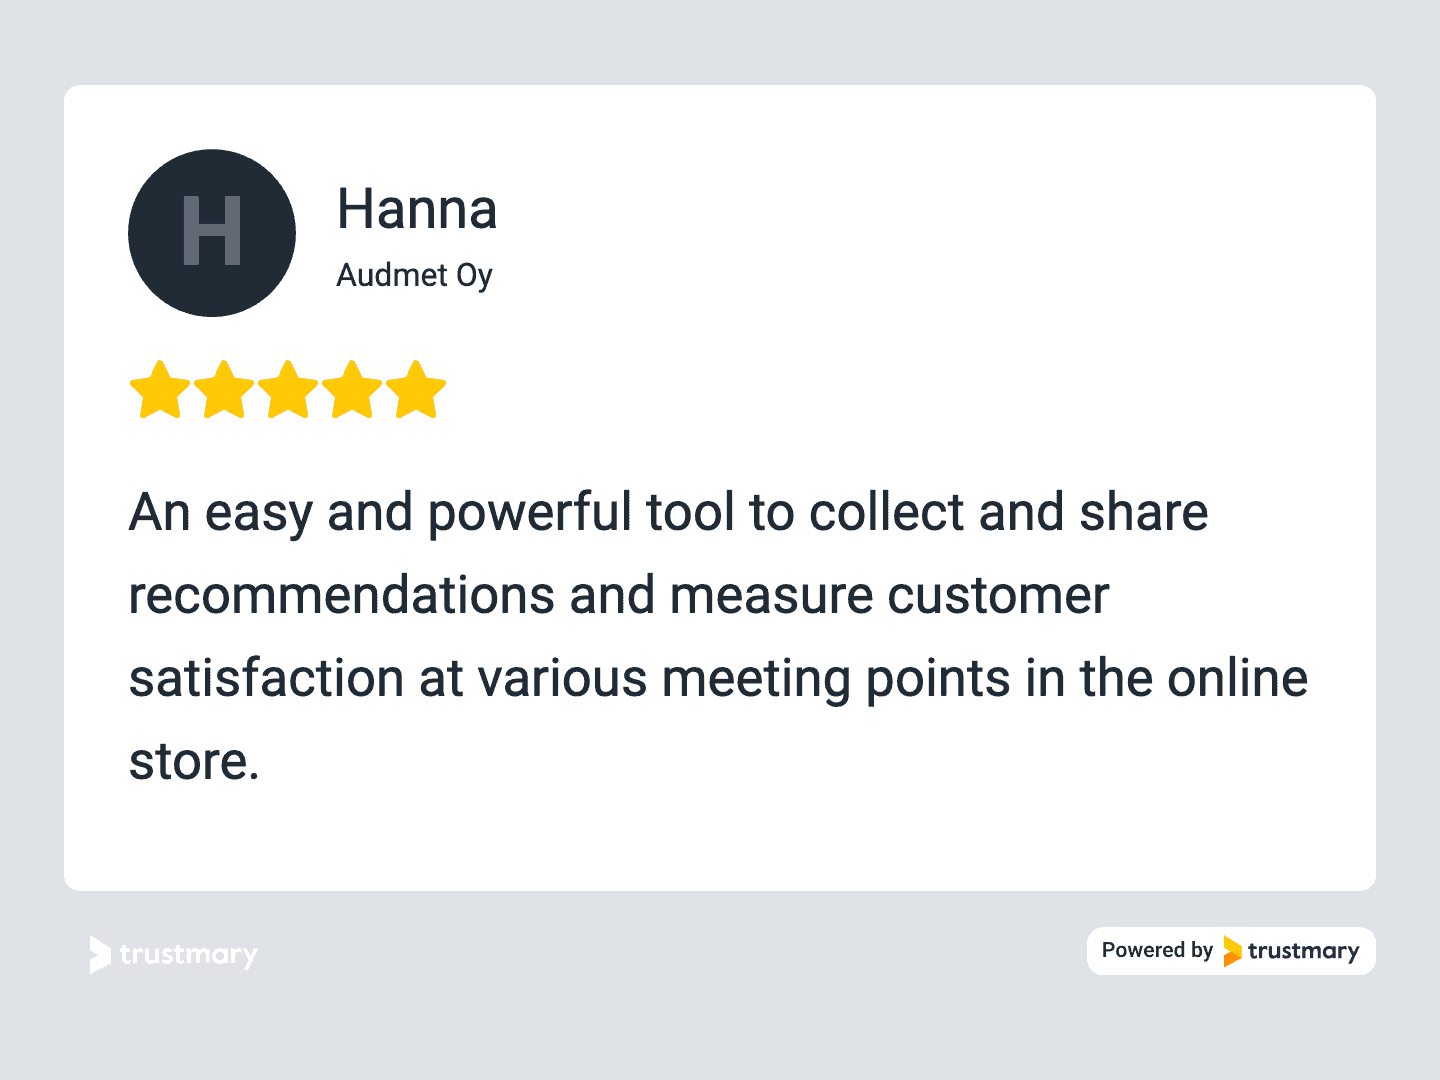 hanna's review